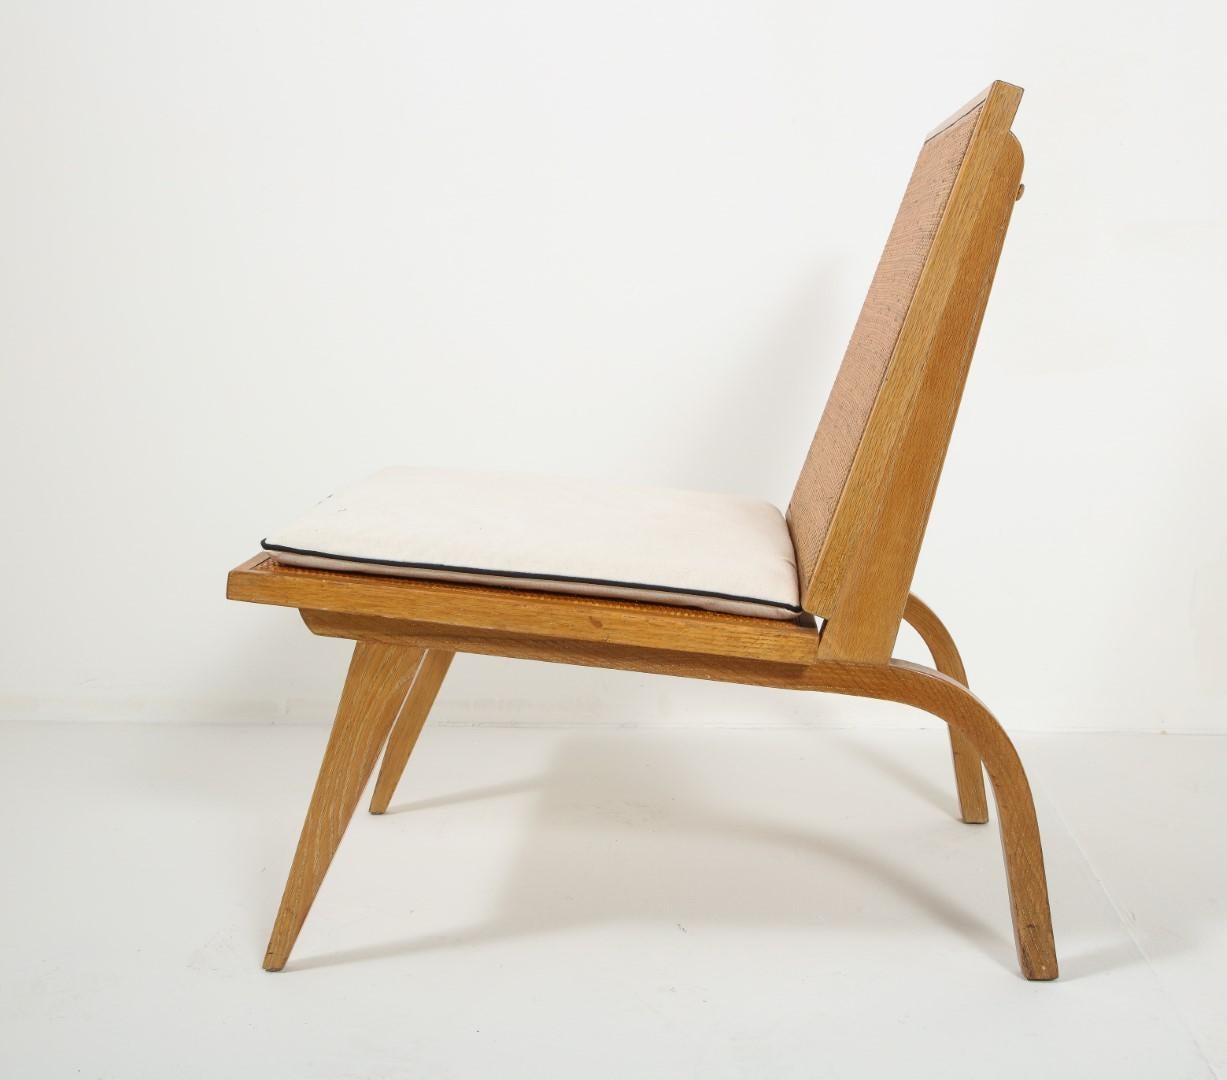 Midcentury oak and cane lounge chair by American architect Edward Durell Stone, manufactured by Fulbright Furniture, 1945. Custom ivory seat cushion with black welting. 

literature: Edward Durell Stone: Evolution of an Architect, Durell Stone,